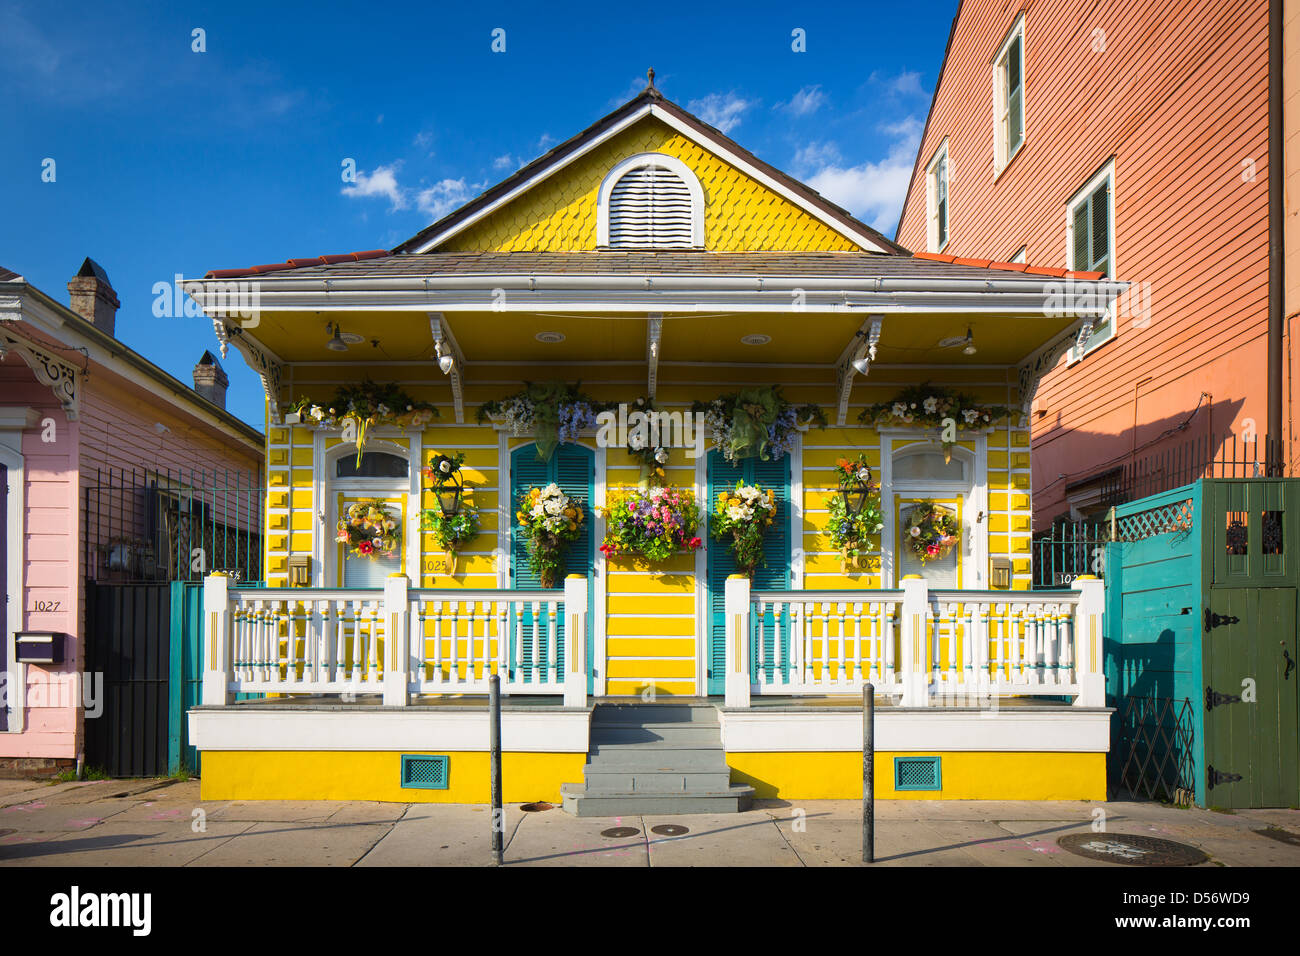 Typical building in the French Quarter area of New Orleans, Louisiana. Stock Photo